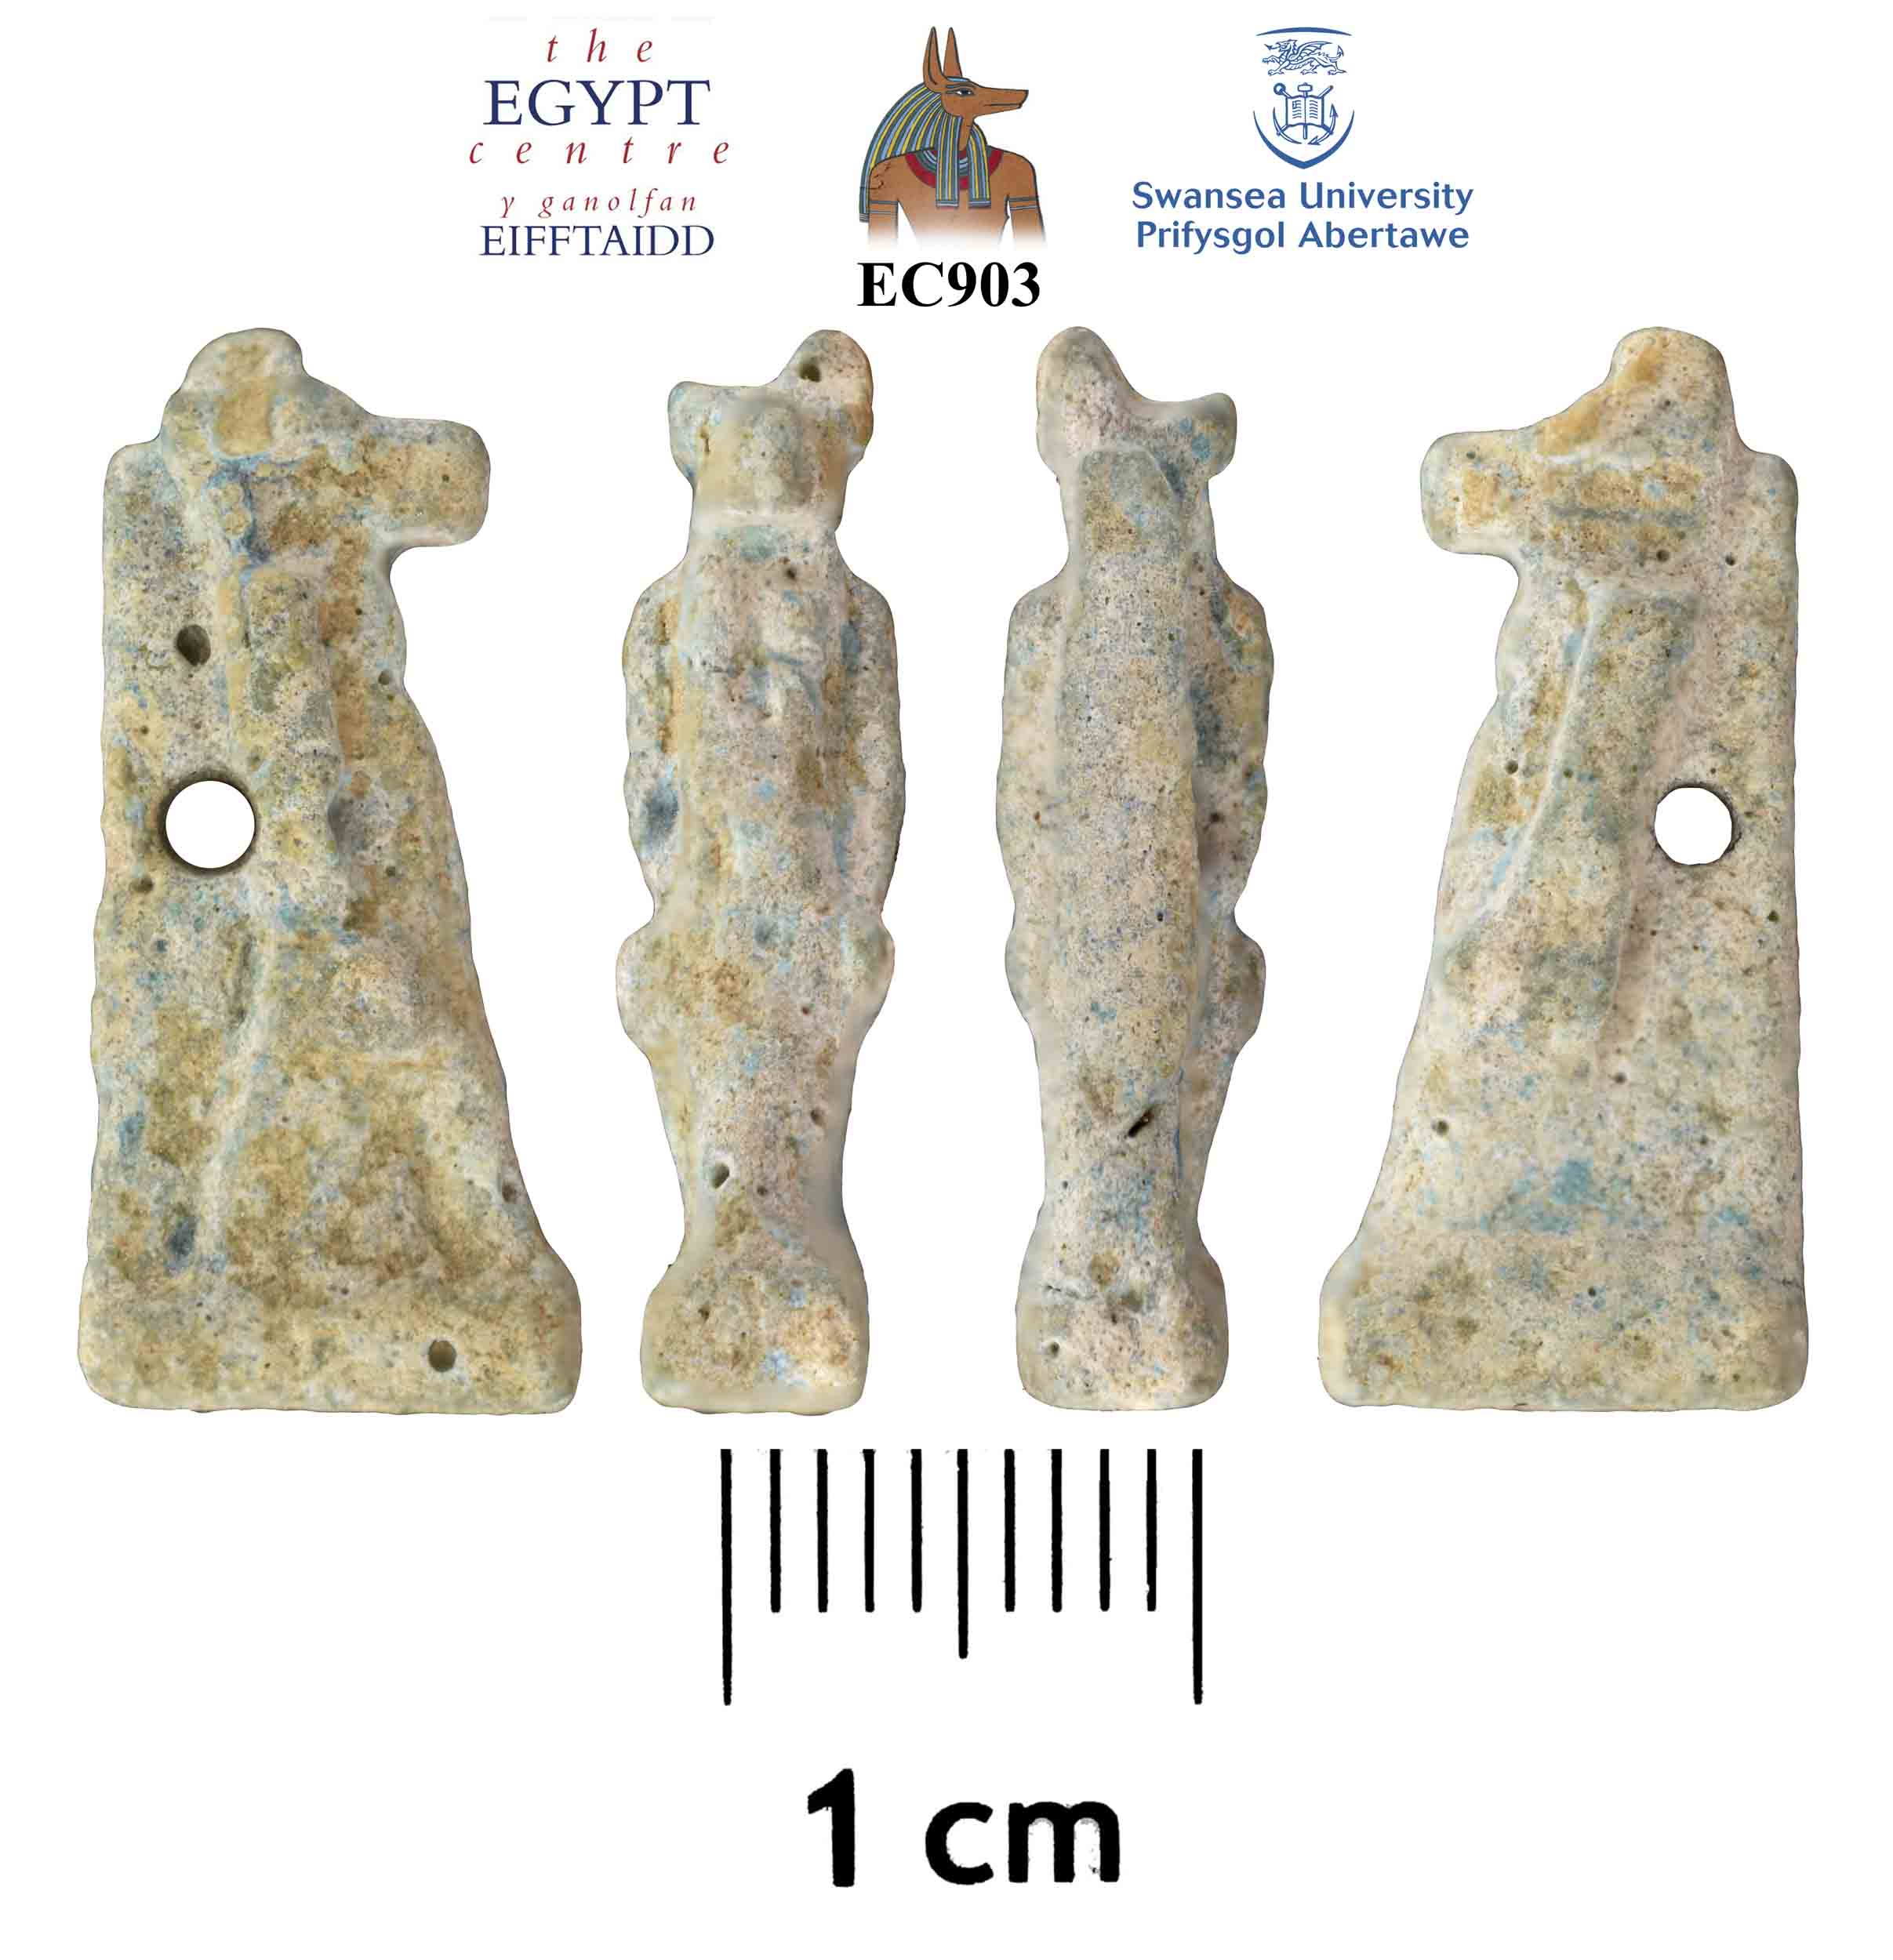 Image for: Faience amulet of Anubis